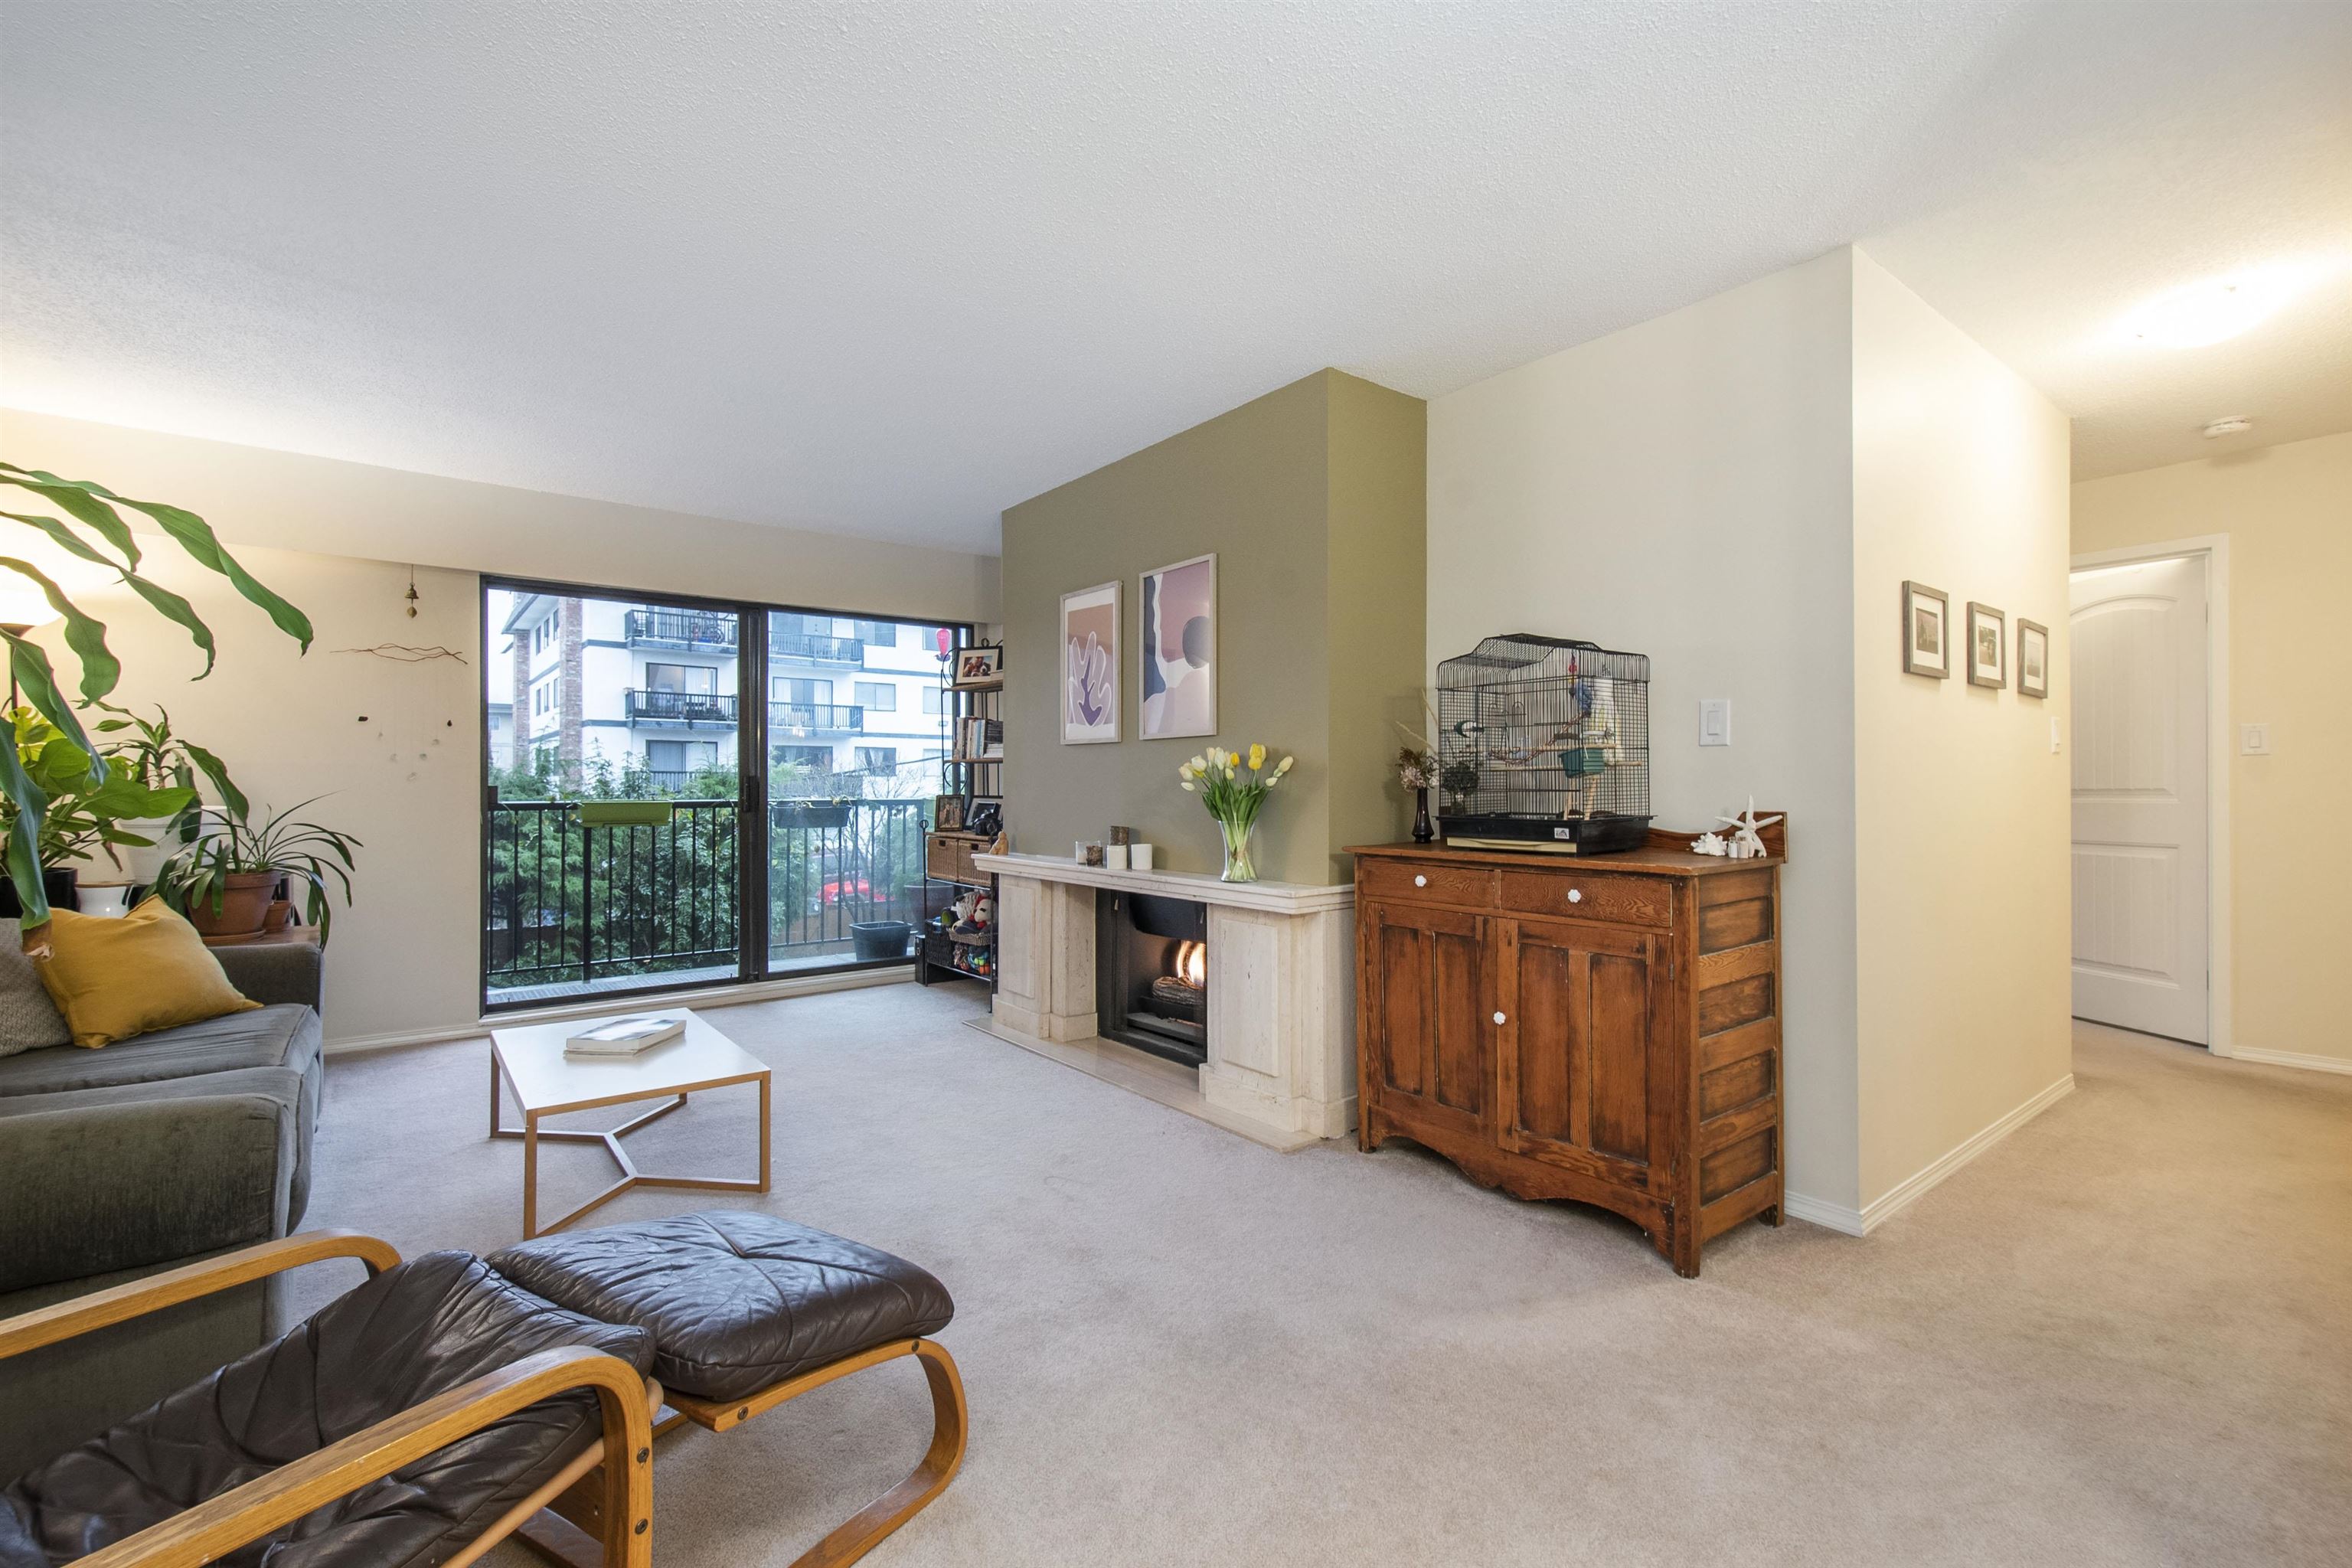 Central Lonsdale Apartment/Condo for sale:  2 bedroom 1,003 sq.ft. (Listed 6400-04-27)